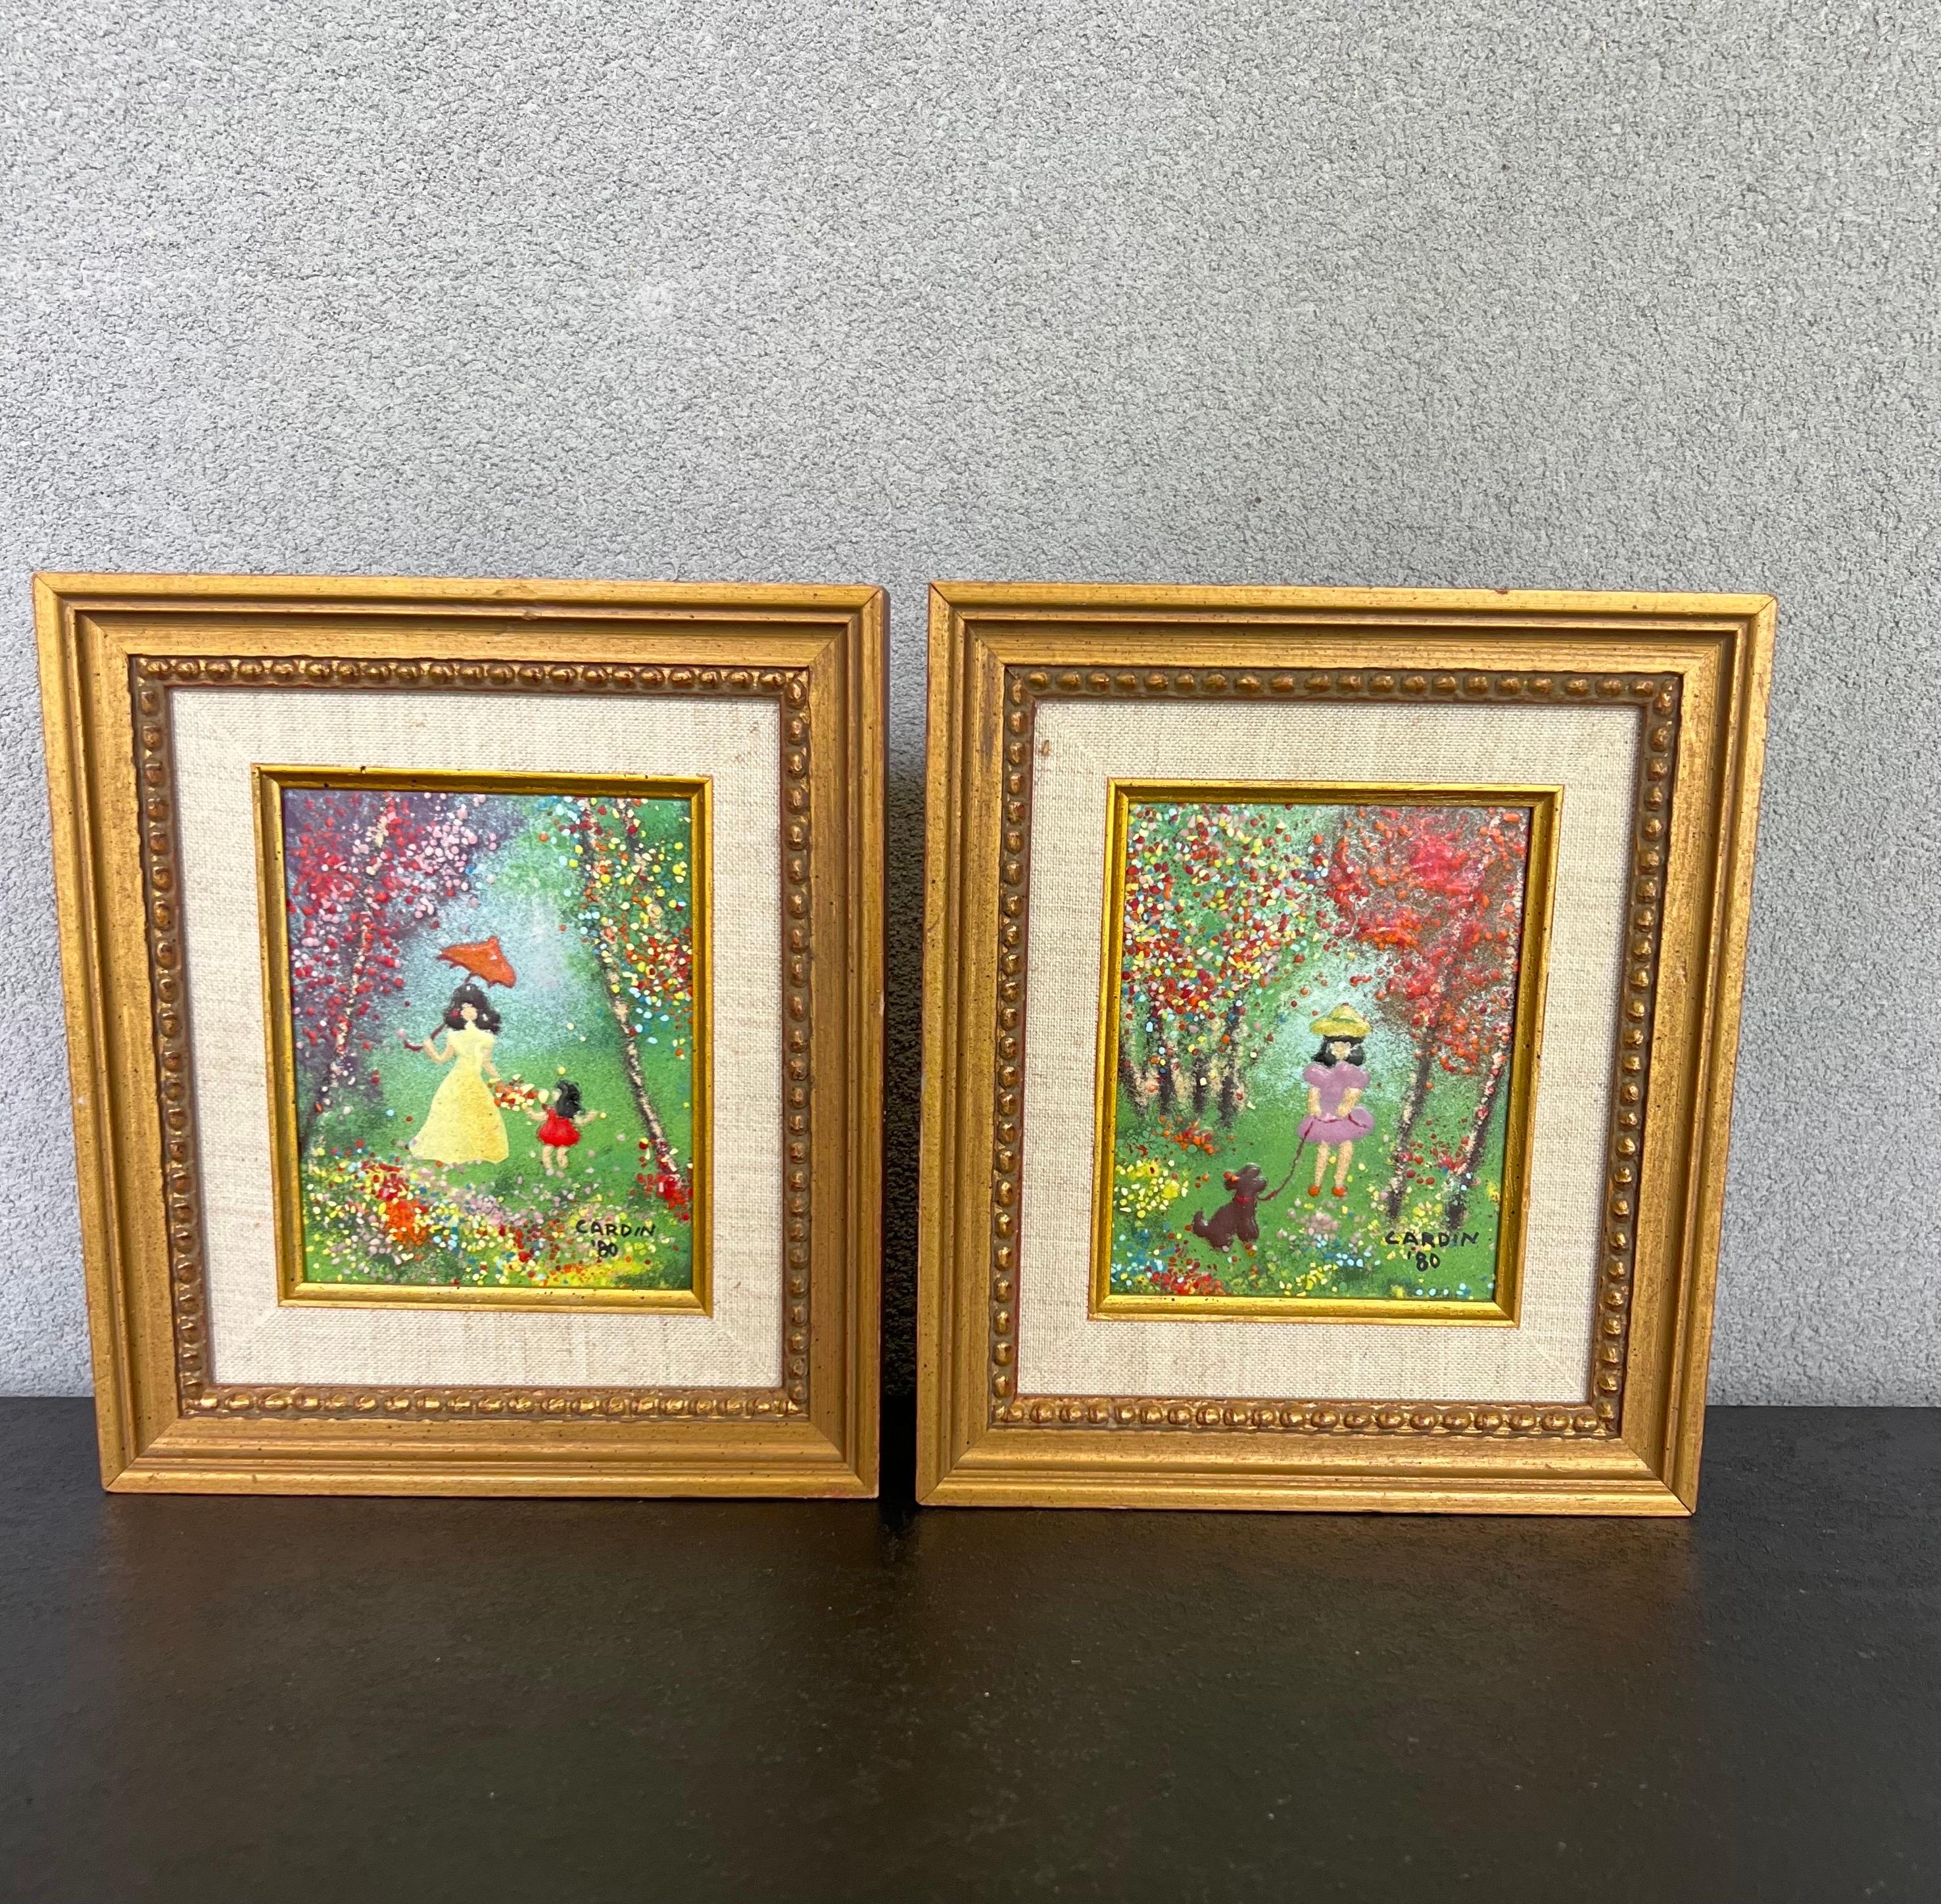 Pair of vintage signed original framed enamel on copper art panels by Louis Cardin.
Very popular collectible items Circa 1980 
Rich vibrant colors with a gold frame. painted by French Artist Louis Cardin 